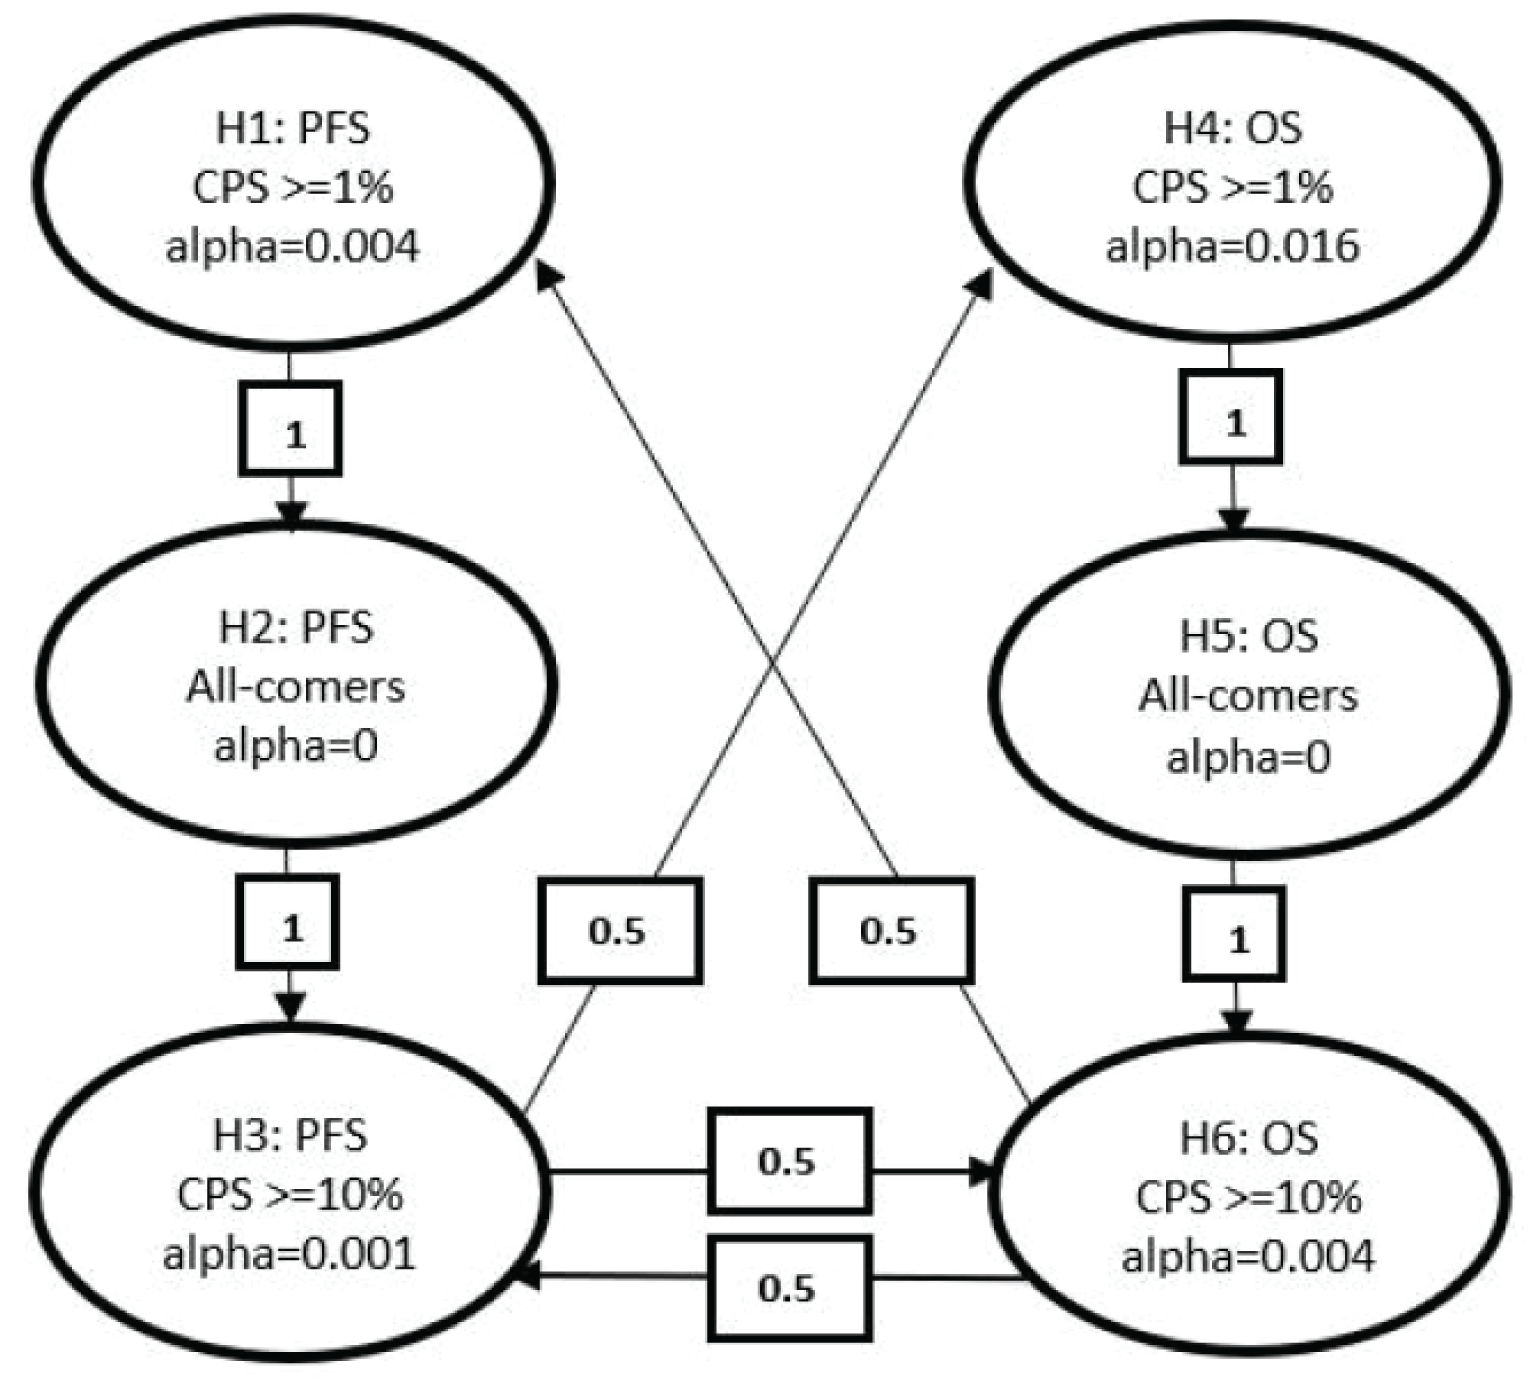 The figure shows the initial allocation of alpha between the hypotheses tested, if the null hypothesis is rejected, either the full alpha is transferred to the sequentially tested hypothesis or split evenly among 2 additional hypotheses. H1 PFS in the CPS ≥ 1 cohort had an allocated alpha of 0.004, H2 PFS in the all-comers cohort had an initial allocated alpha of 0, H3 PFS in the CPS ≥ 10 cohort had an initial allocated alpha of 0.001, H4 OS in the CPS ≥ 1 cohort had an initial allocated alpha of 0.016, H5 OS in the all-comers cohort had an initial allocated alpha of 0, H6 OS in the CPS ≥ 10 cohort had an initial allocated alpha of 0.004.